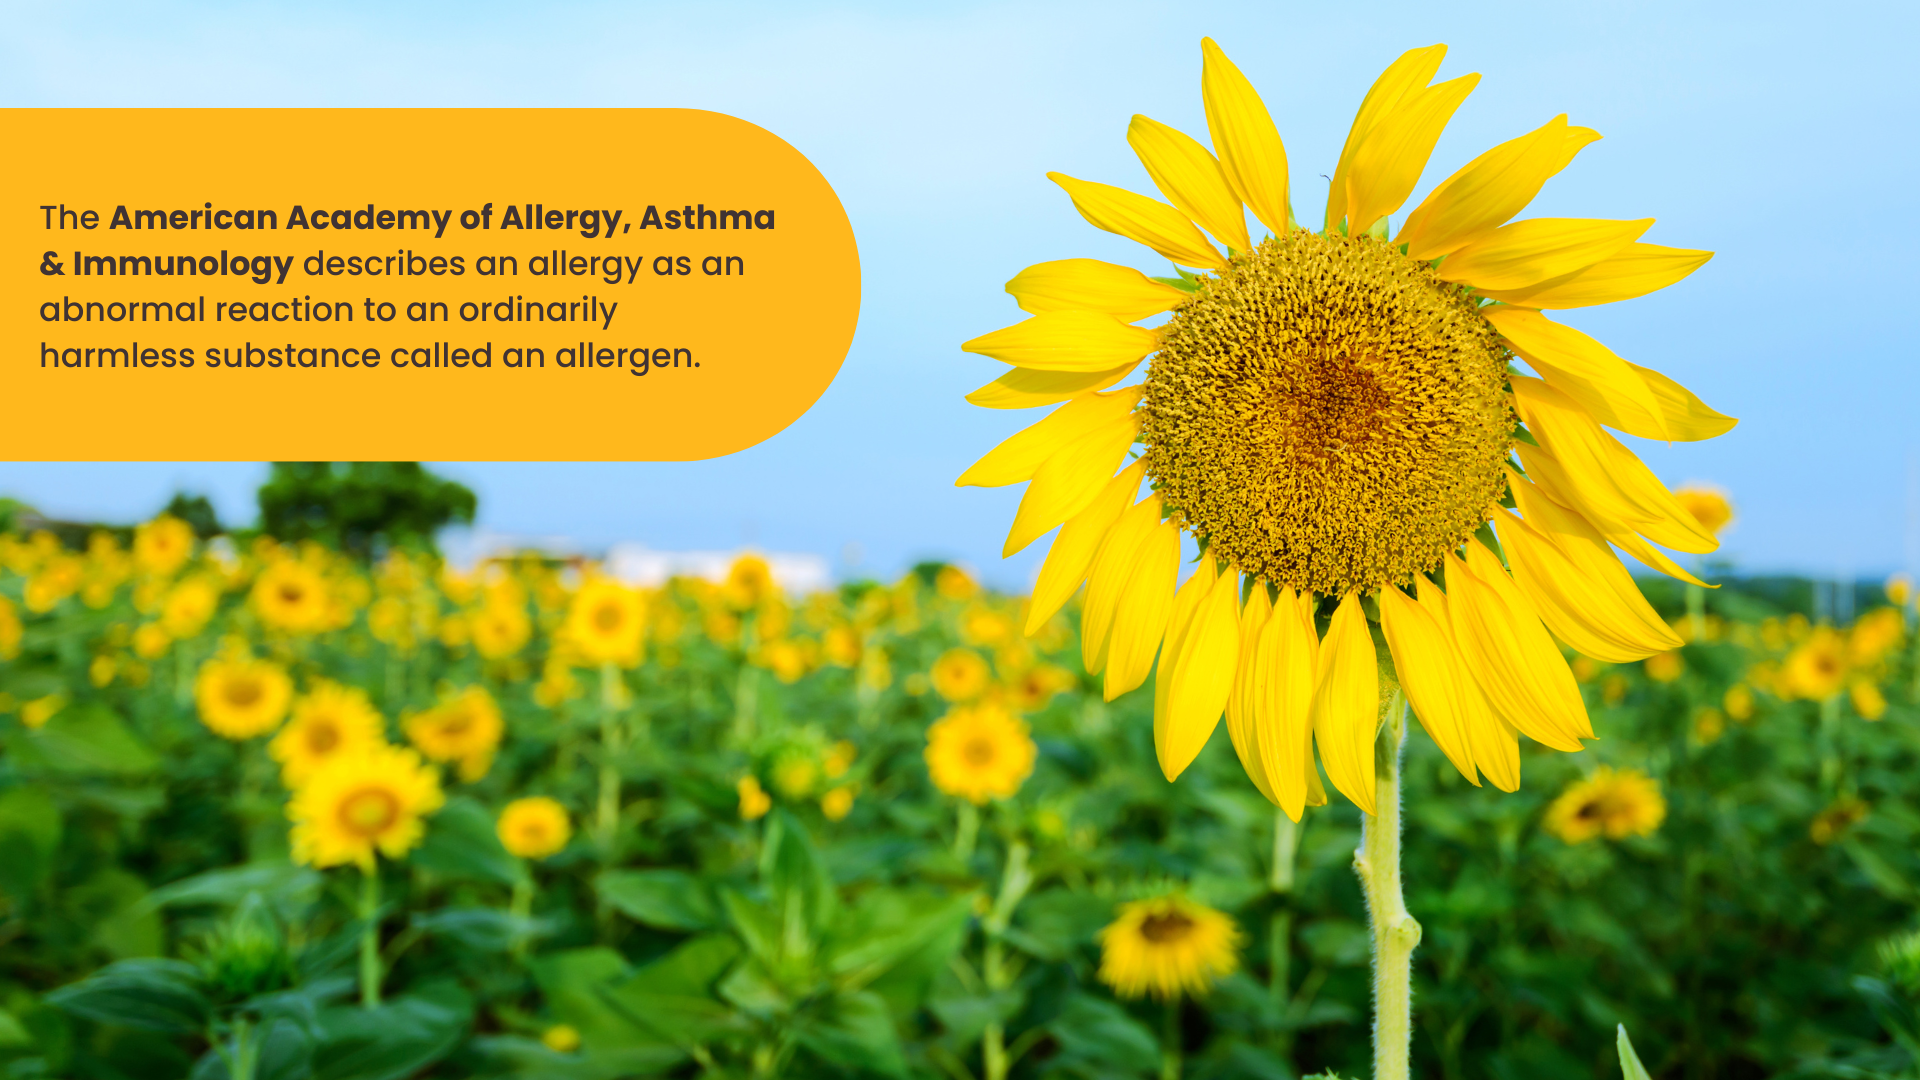 A close-up of a sunflower within a sunflower field with text that describes an allergy as an abnormal reaction to an ordinarily harmless substance called allergens.